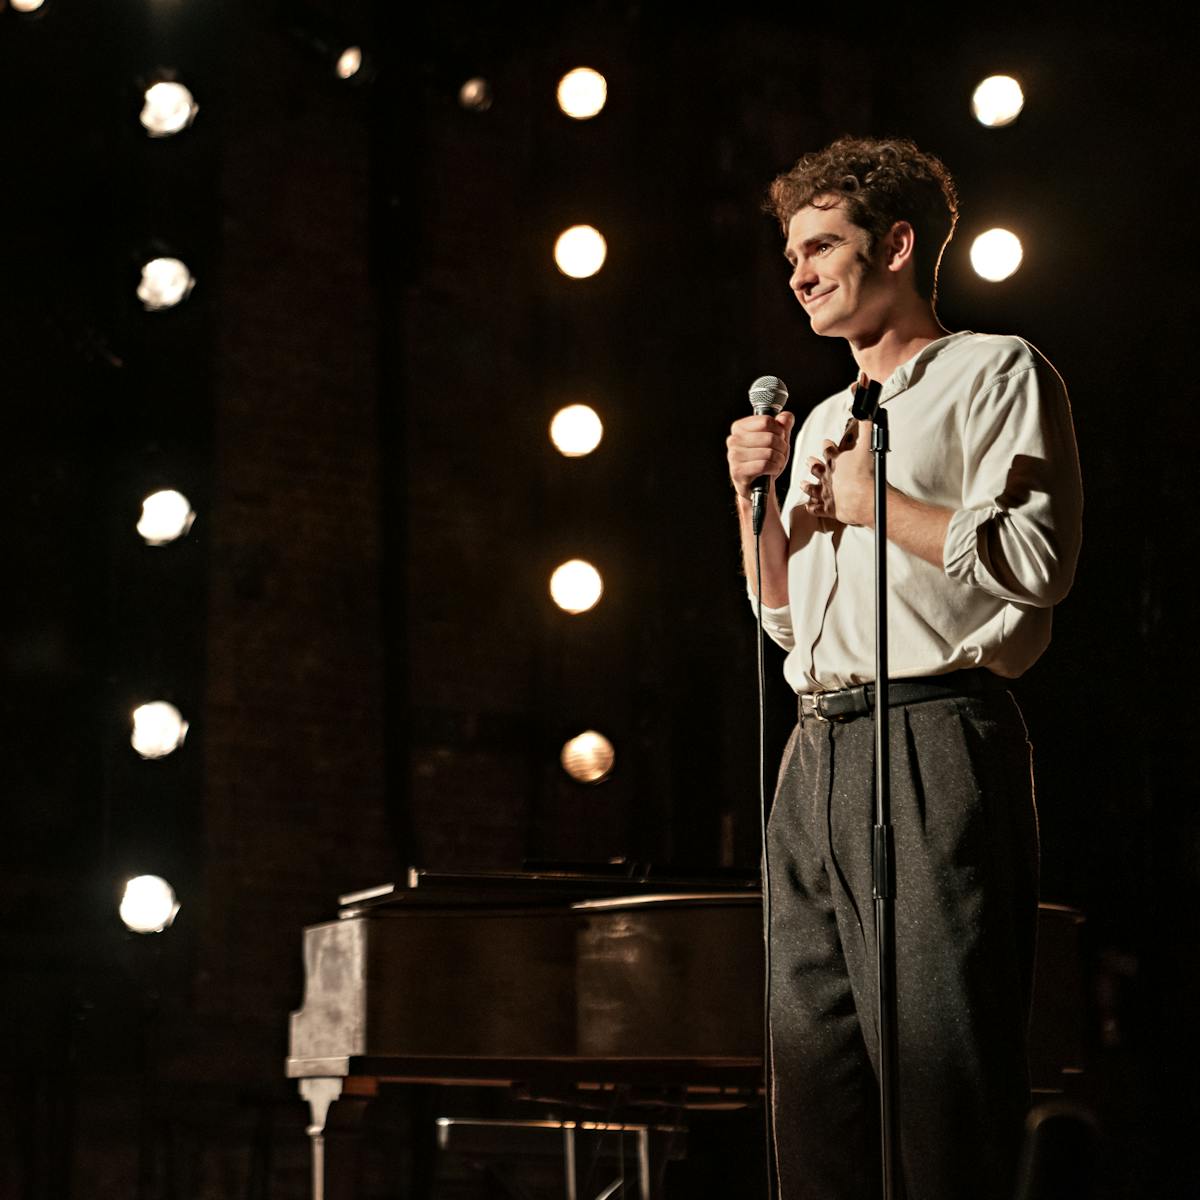 Andrew Garfield wears a white shirt and dark pants, and speaks into a microphone on a string-lit stage.